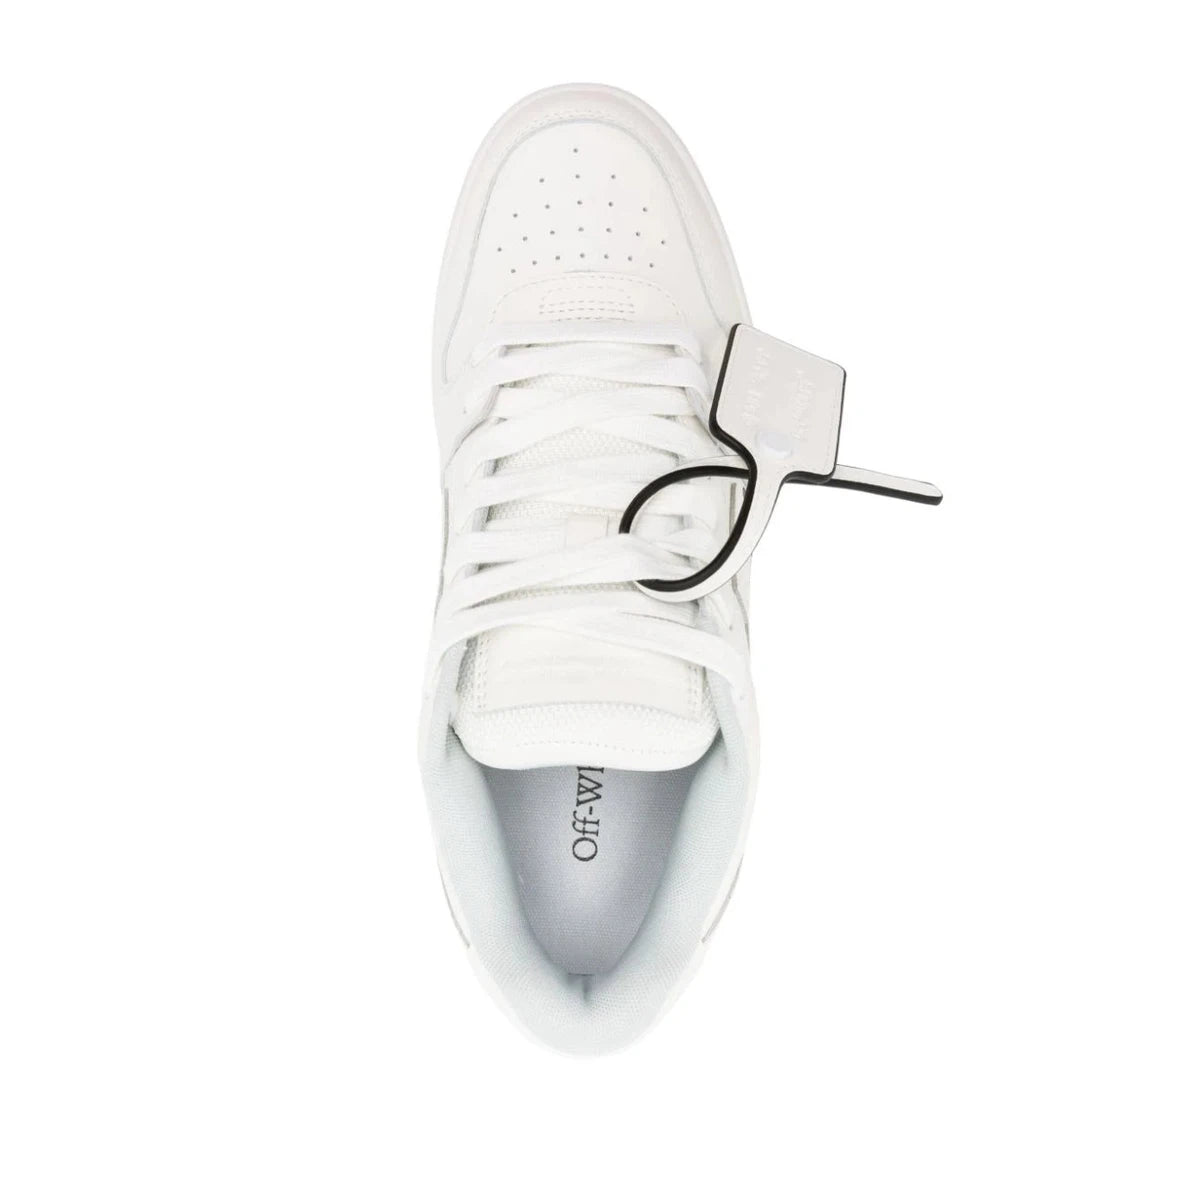 Off-White Out Of Office sneakers